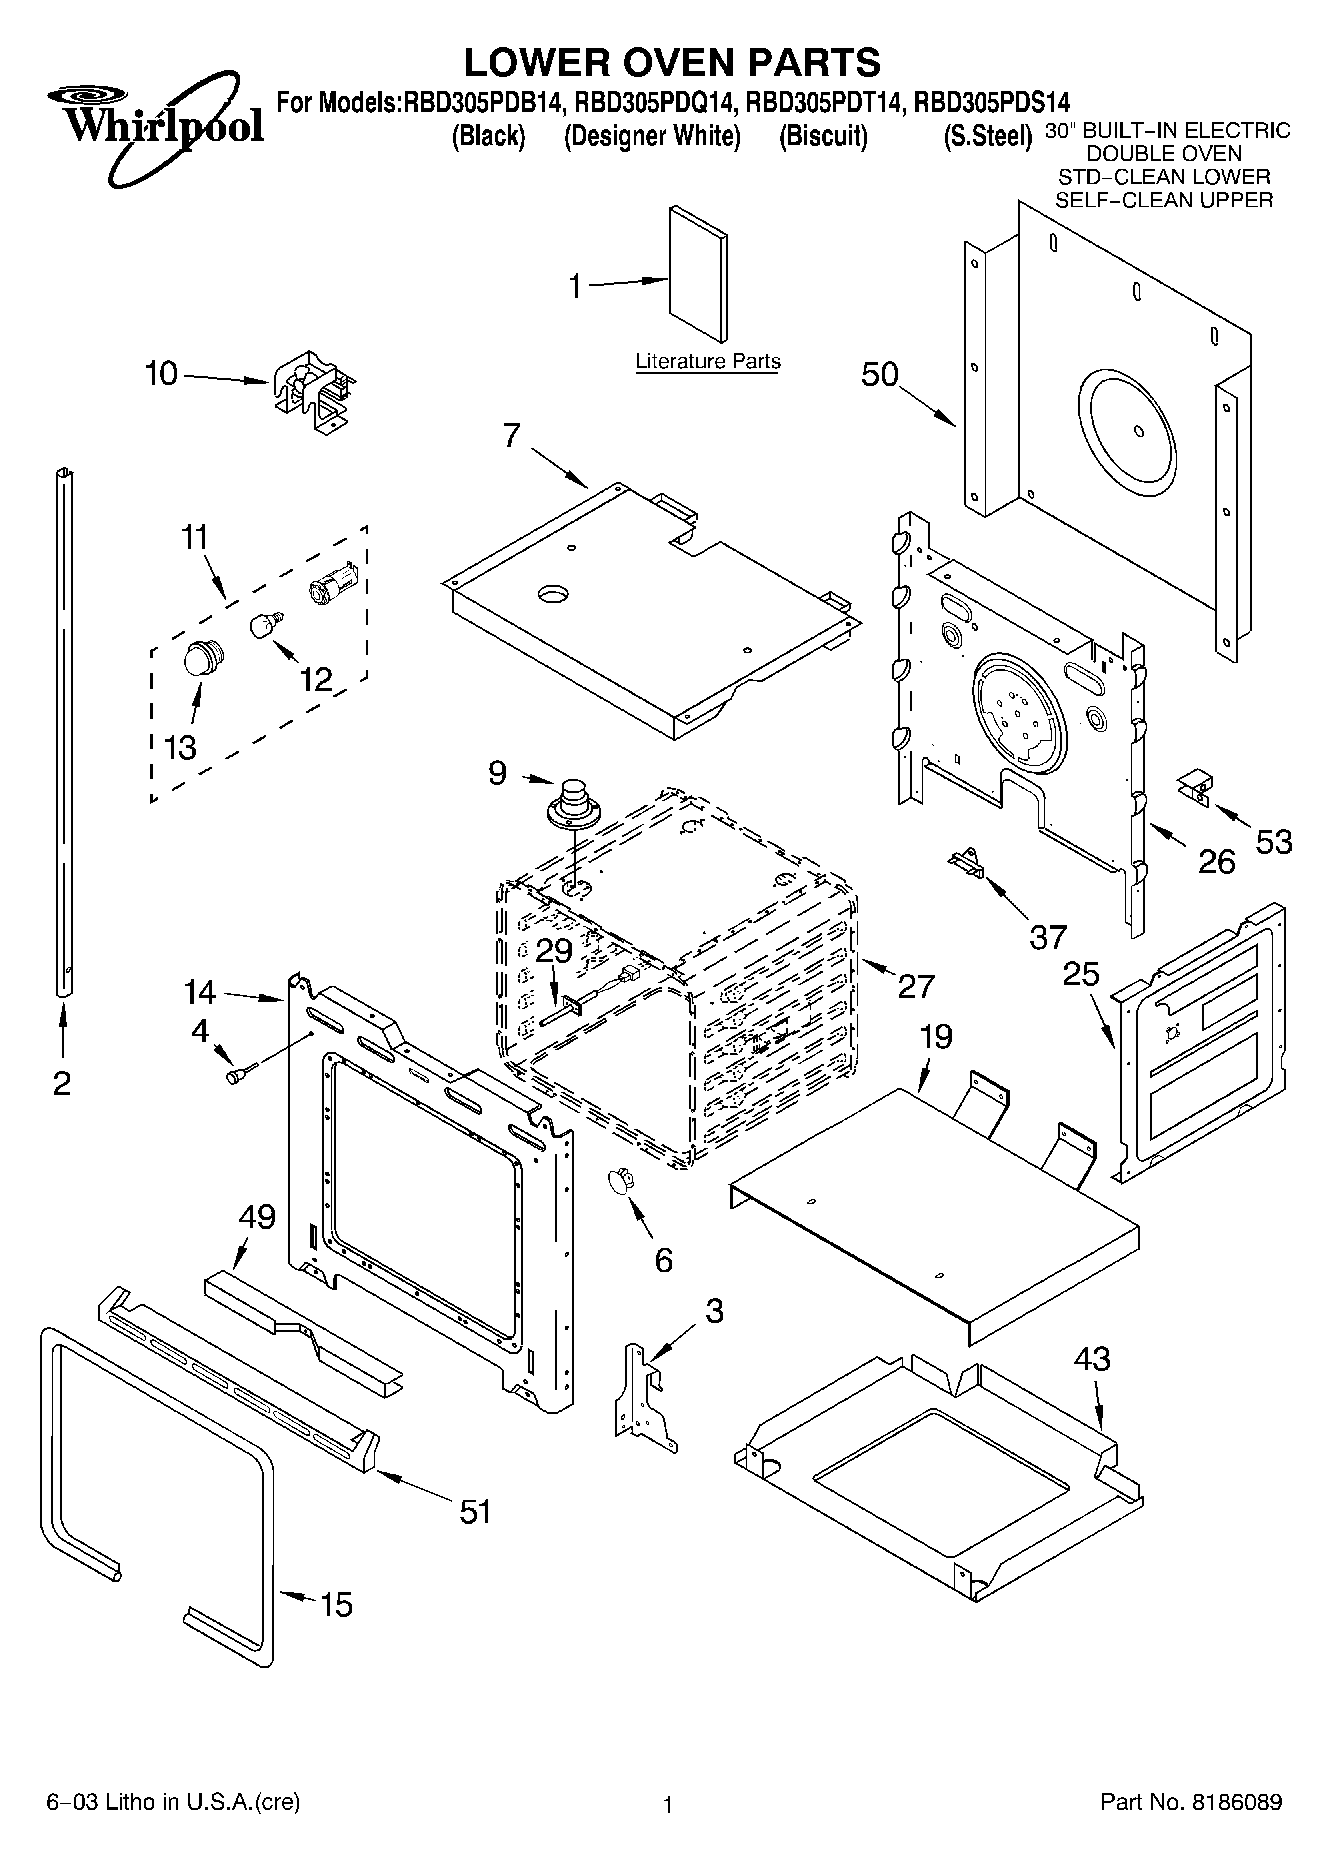 01 - LOWER OVEN PARTS